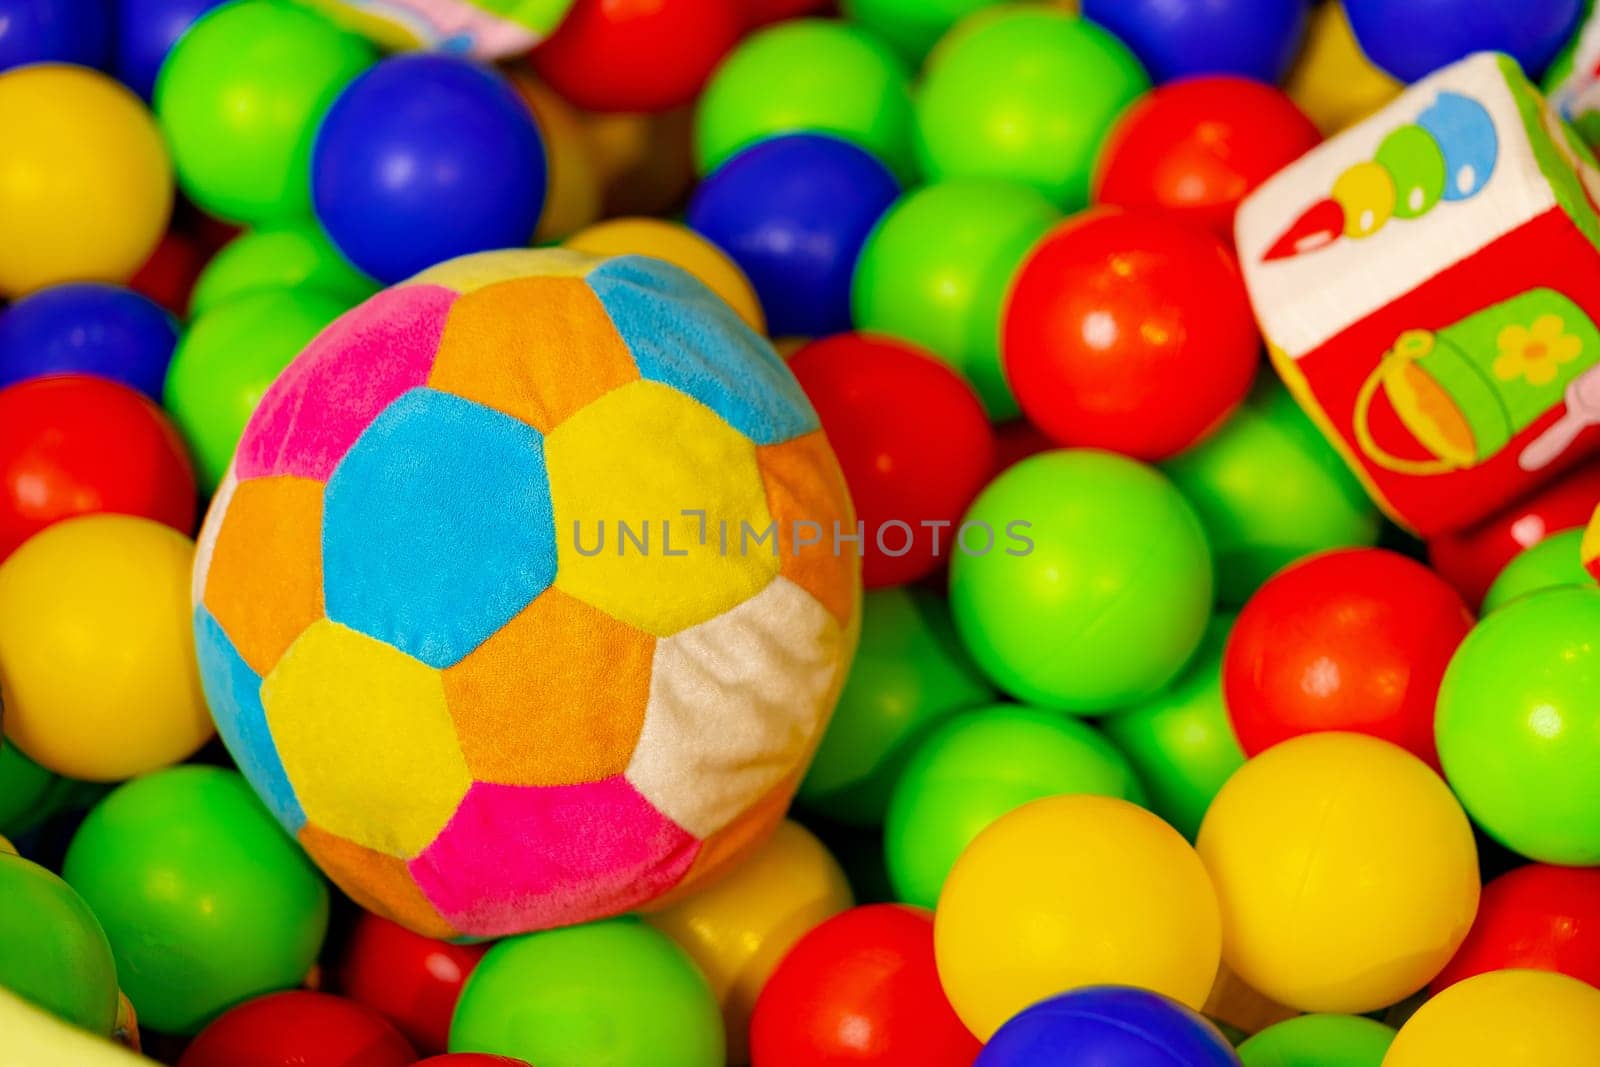 Colorful Soft Ball and Toy Truck in a Pit of Plastic Balls at an Indoor Playground by Fabrikasimf